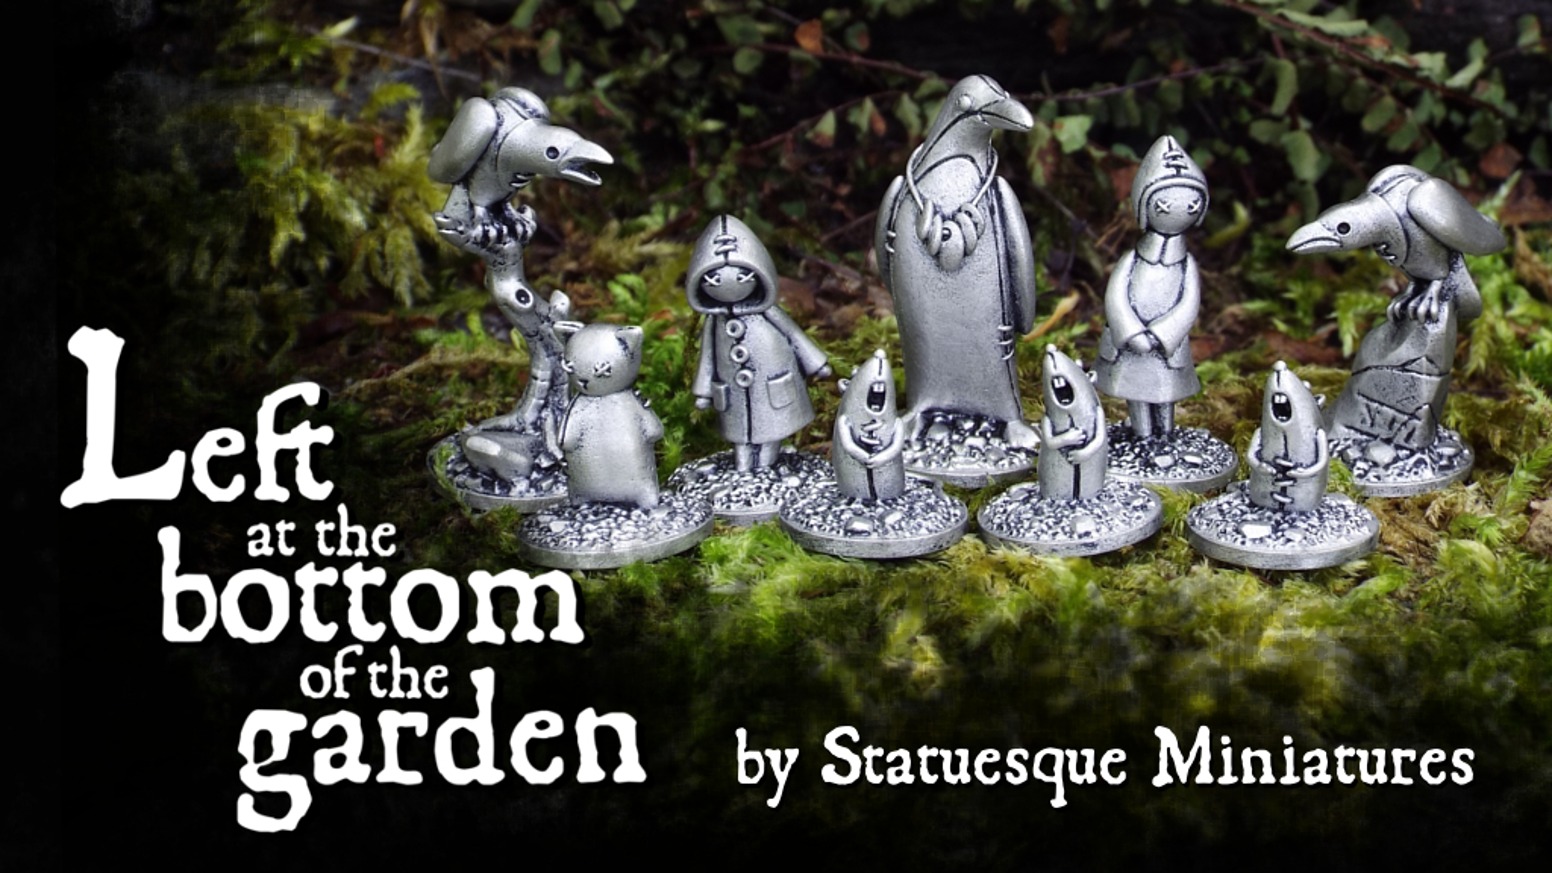 A set of high quality, lead-free metal miniatures of lost toys, suitable for tabletop gaming, painting and collecting. The toys can now be purchased over on the Statuesque Miniatures shop.